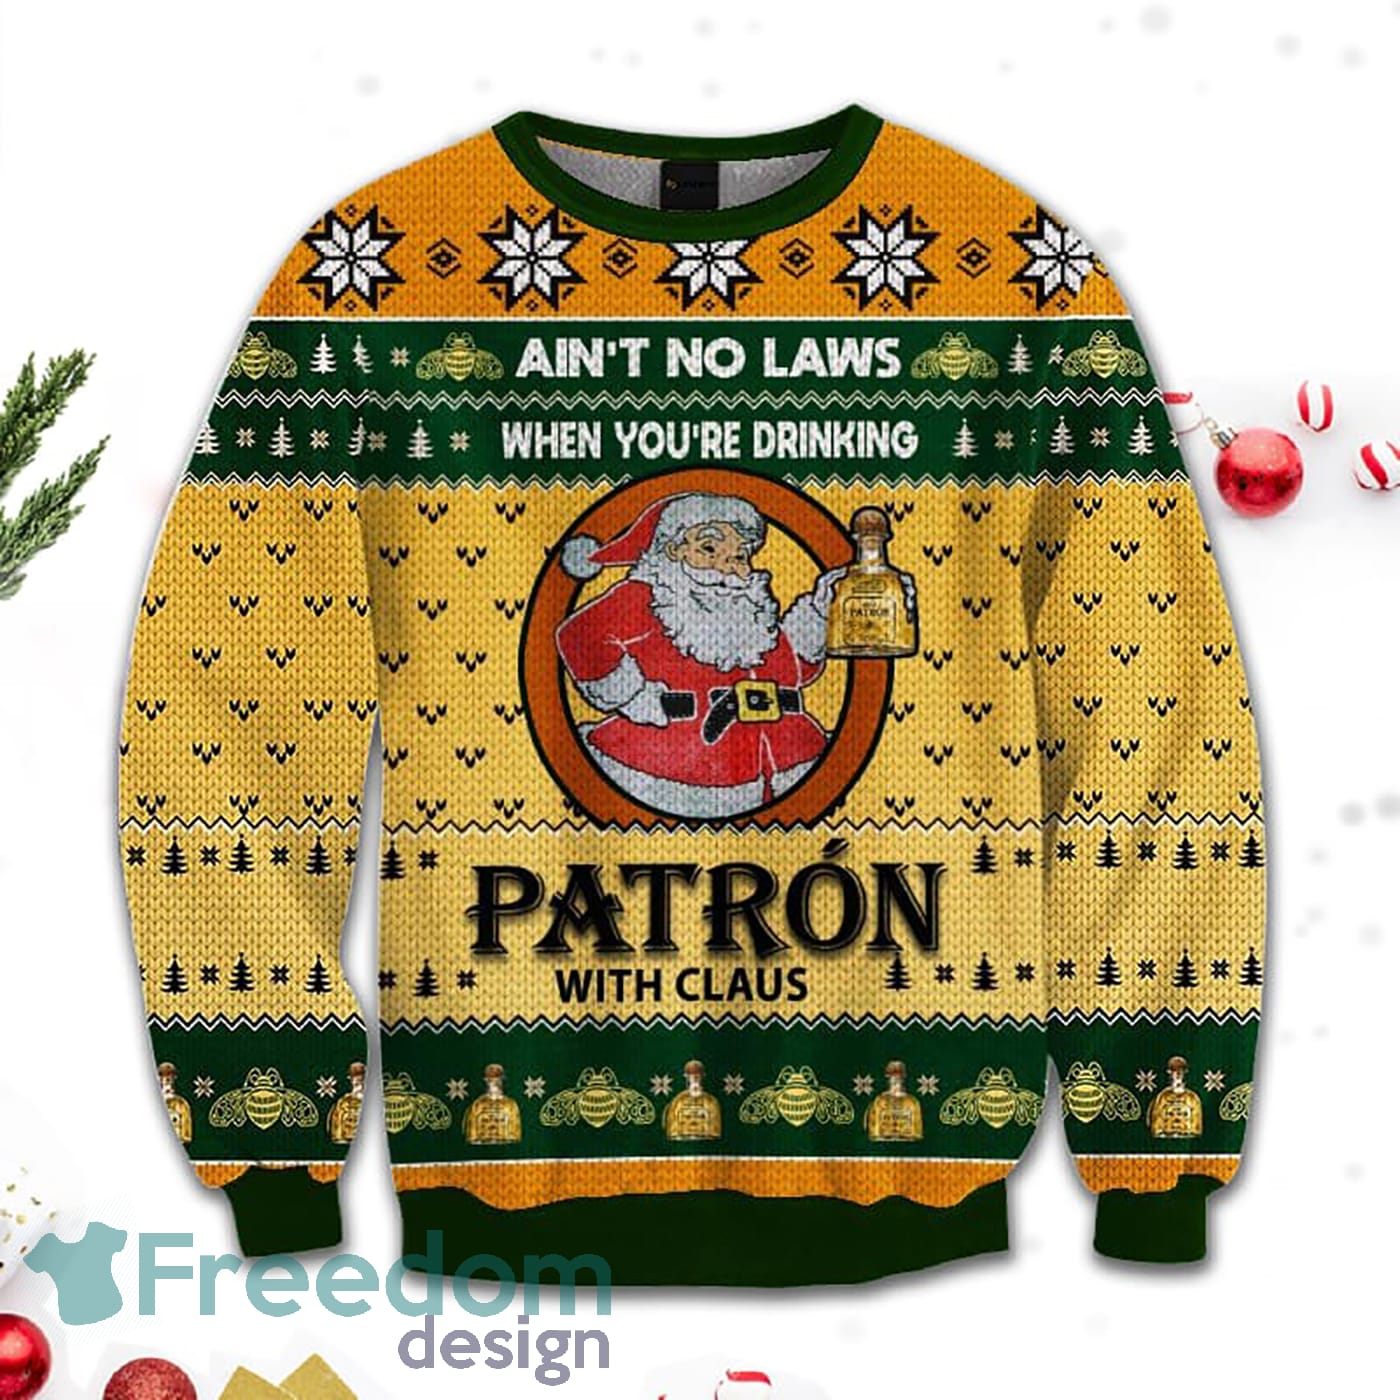 Merr Christmas Ain't No Laws When You're Drink Patron With Claus Sweatshirt